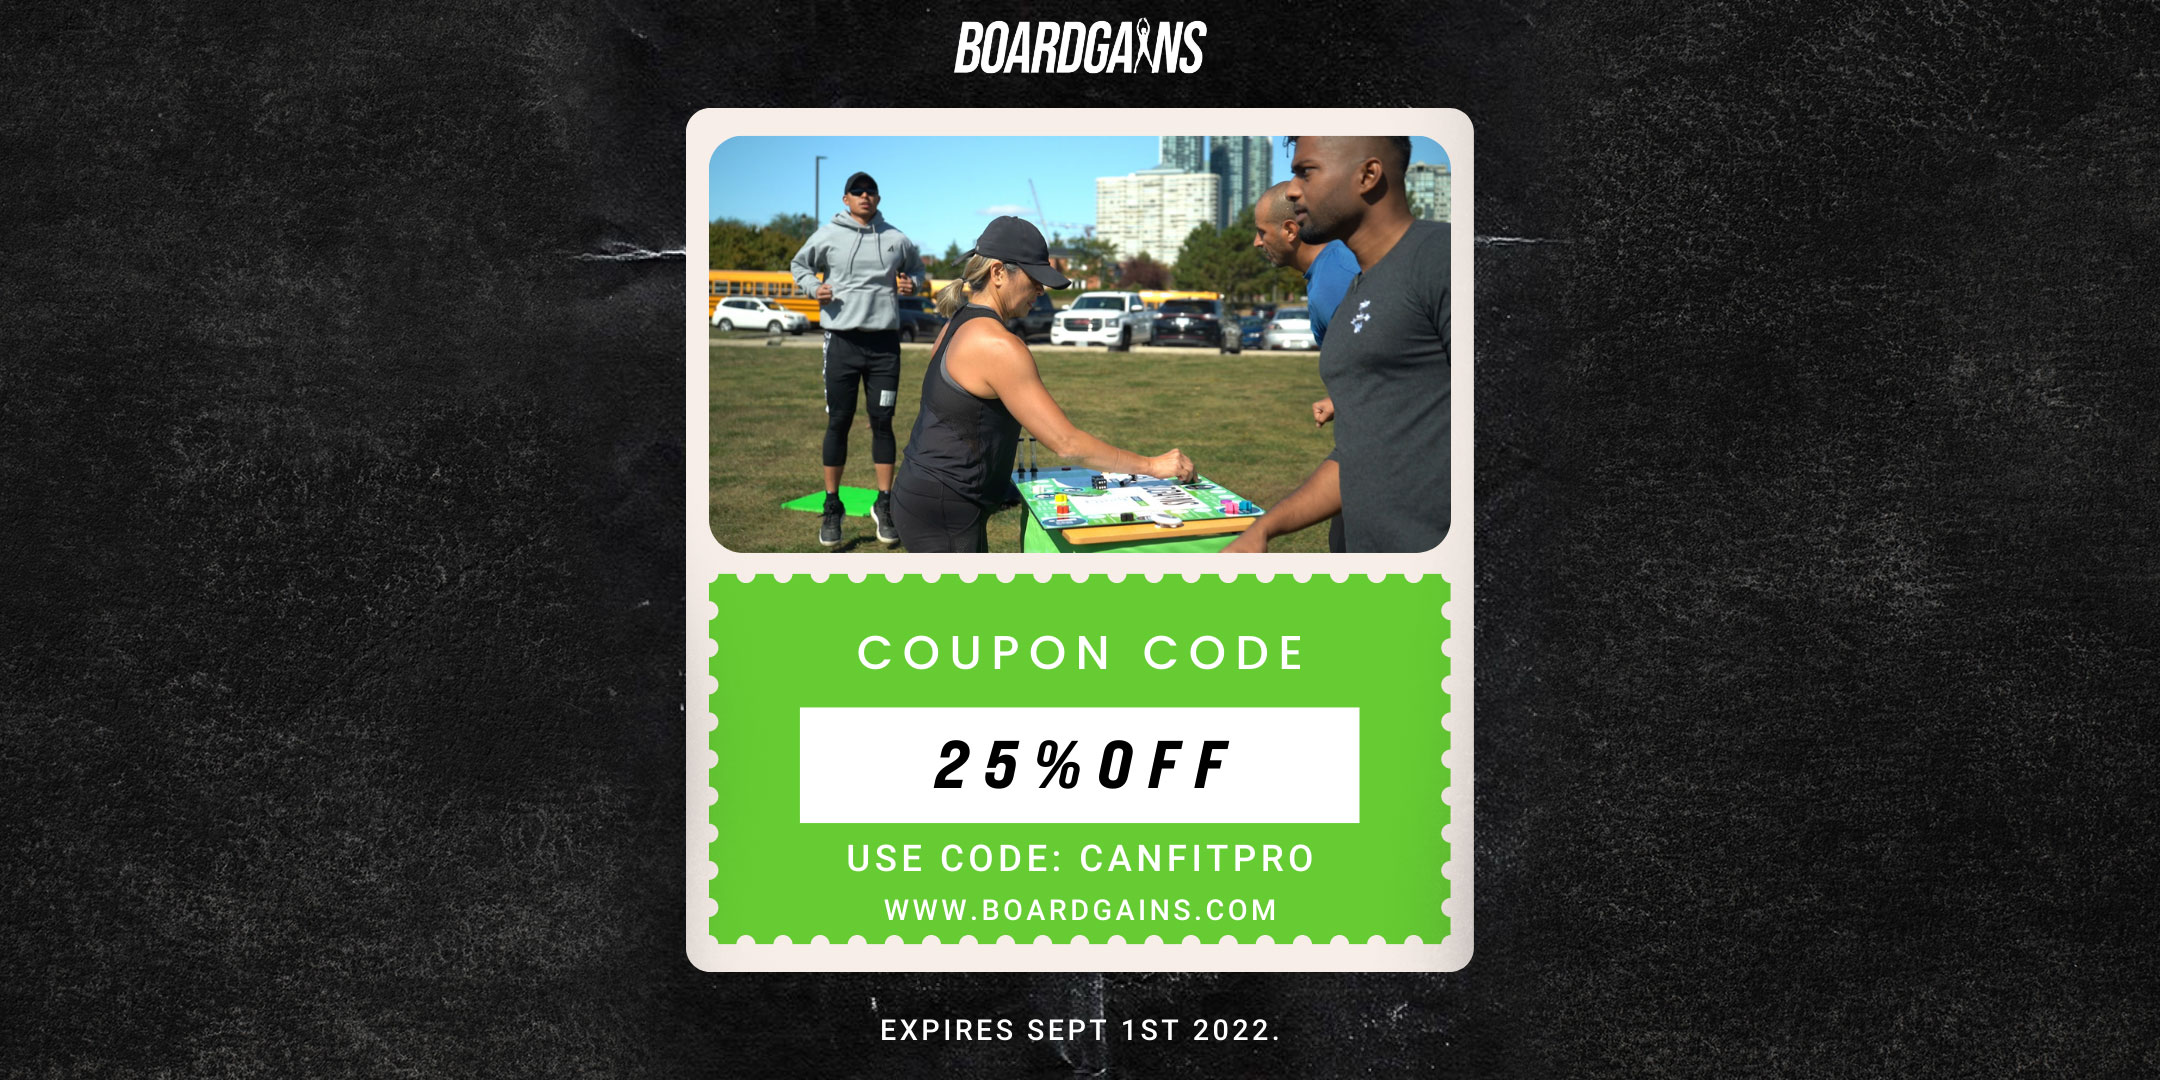 boardgains coupon